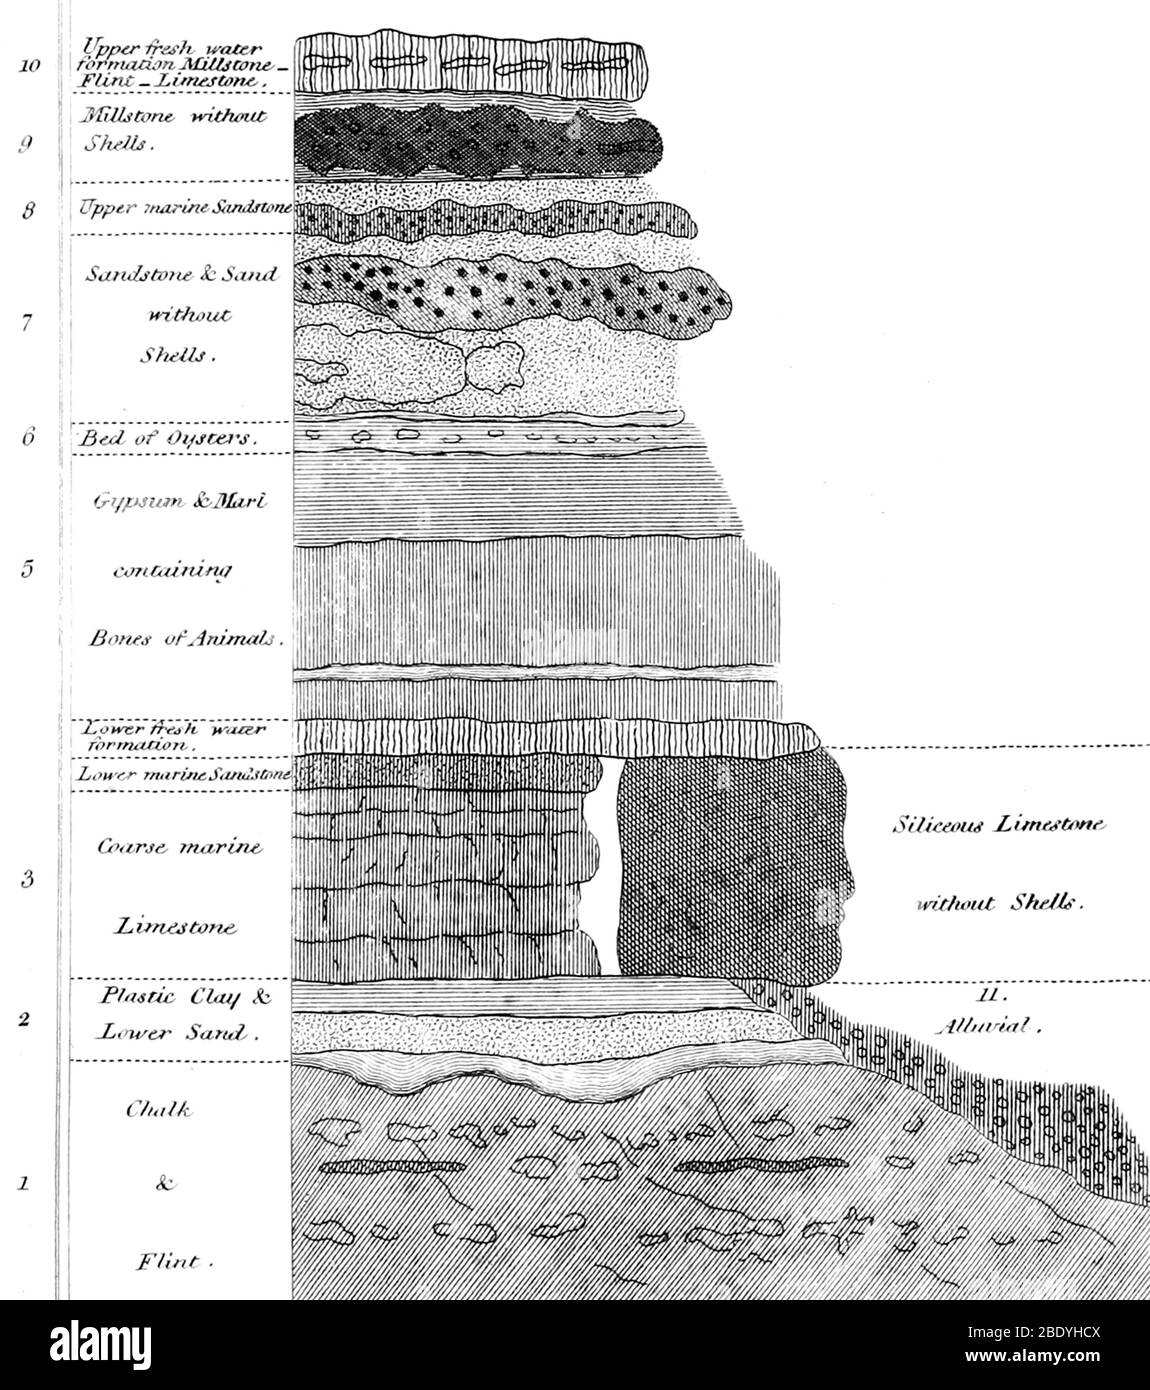 Stratigraphic profile. Cuvier, as previously Buffon, claims that the fossils show an alternation of different faunas during the geological history of the earth, various 'revolutions' have changed the face of the earth and species have become extinct and been replaced by new ones. To support this hypothesis he studied and mapped the stratigraphic successions of the basin of Paris. In collaboration with the young geologist Alexandre Brongniart, after four years of work, in 1808 they published the 'Essai minéraligique sur les environs de Paris' (1st edition 1808), complete with a geological map a Stock Photo